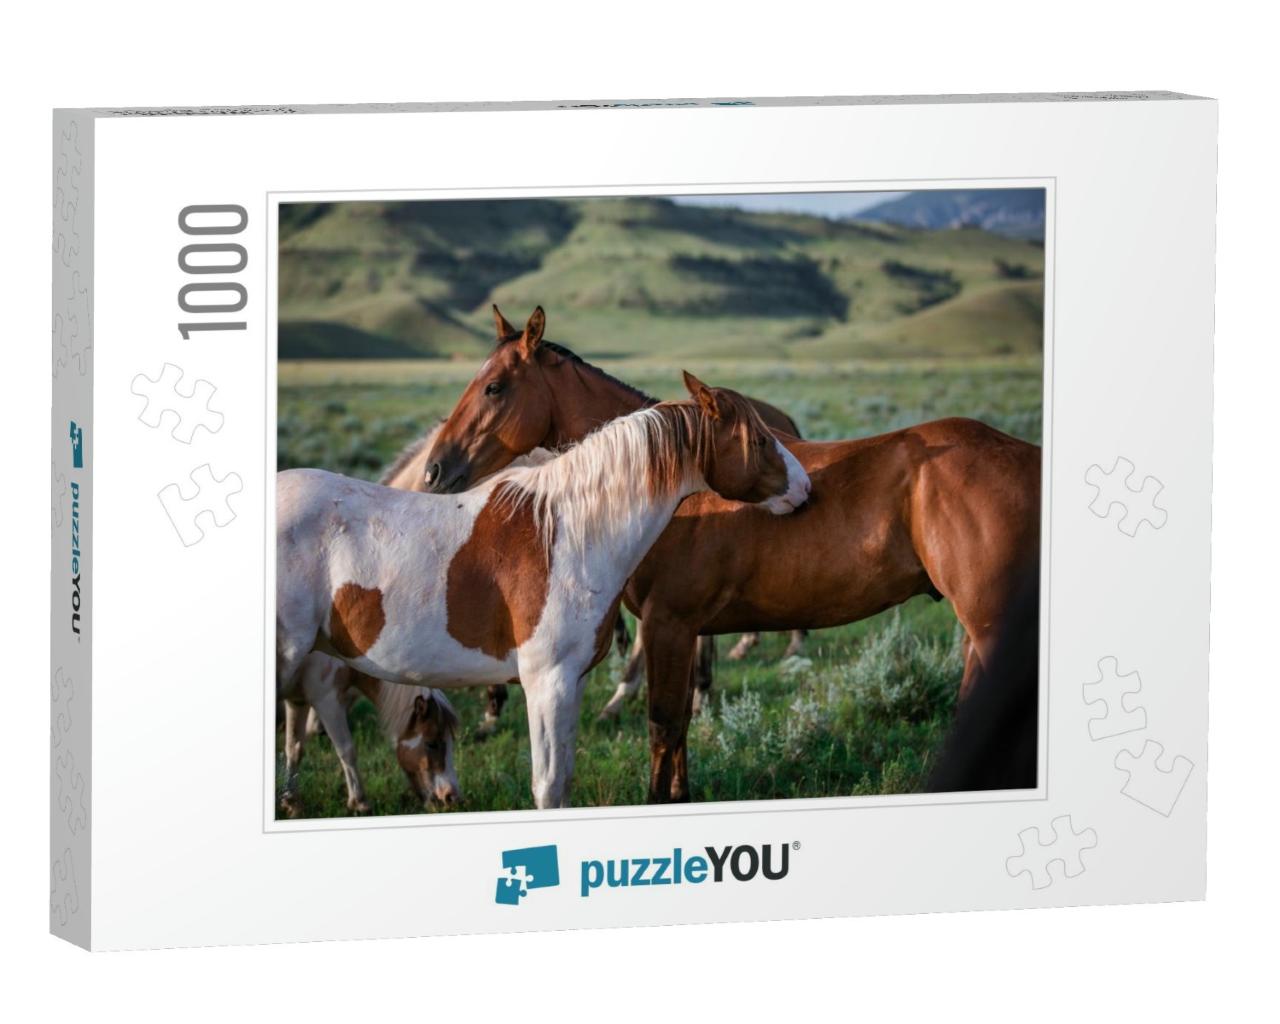 Paint Pony & Ranch Horse Friend on the Range in Montana... Jigsaw Puzzle with 1000 pieces